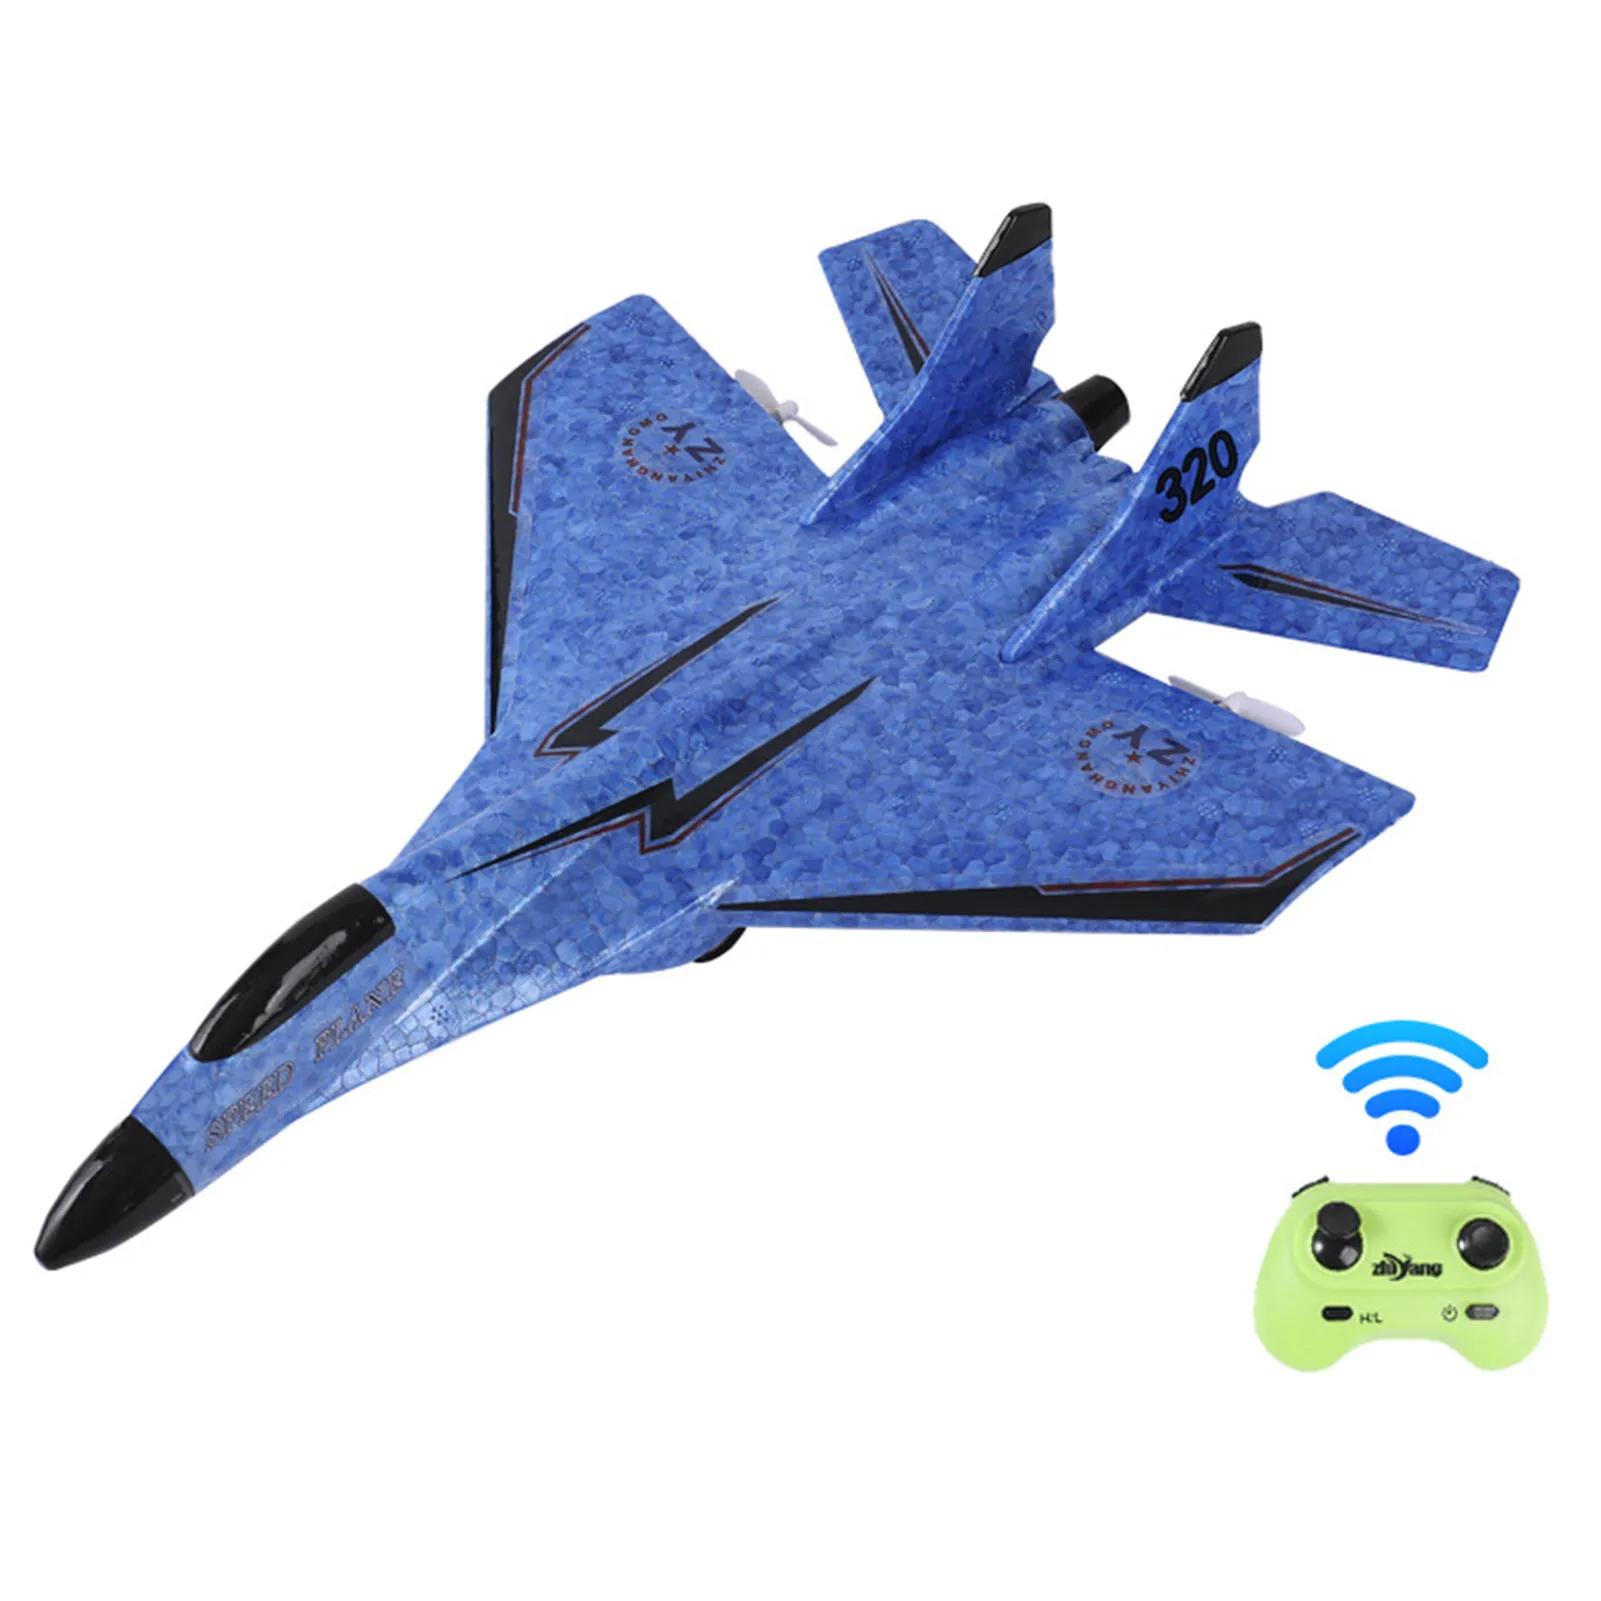 Rc Airplane With Light Model Aircrafts Epp Foam Fighter Rechargeable: Unbreakable and Maneuverable: The Benefits of the EPP Foam Fighter RC Airplane